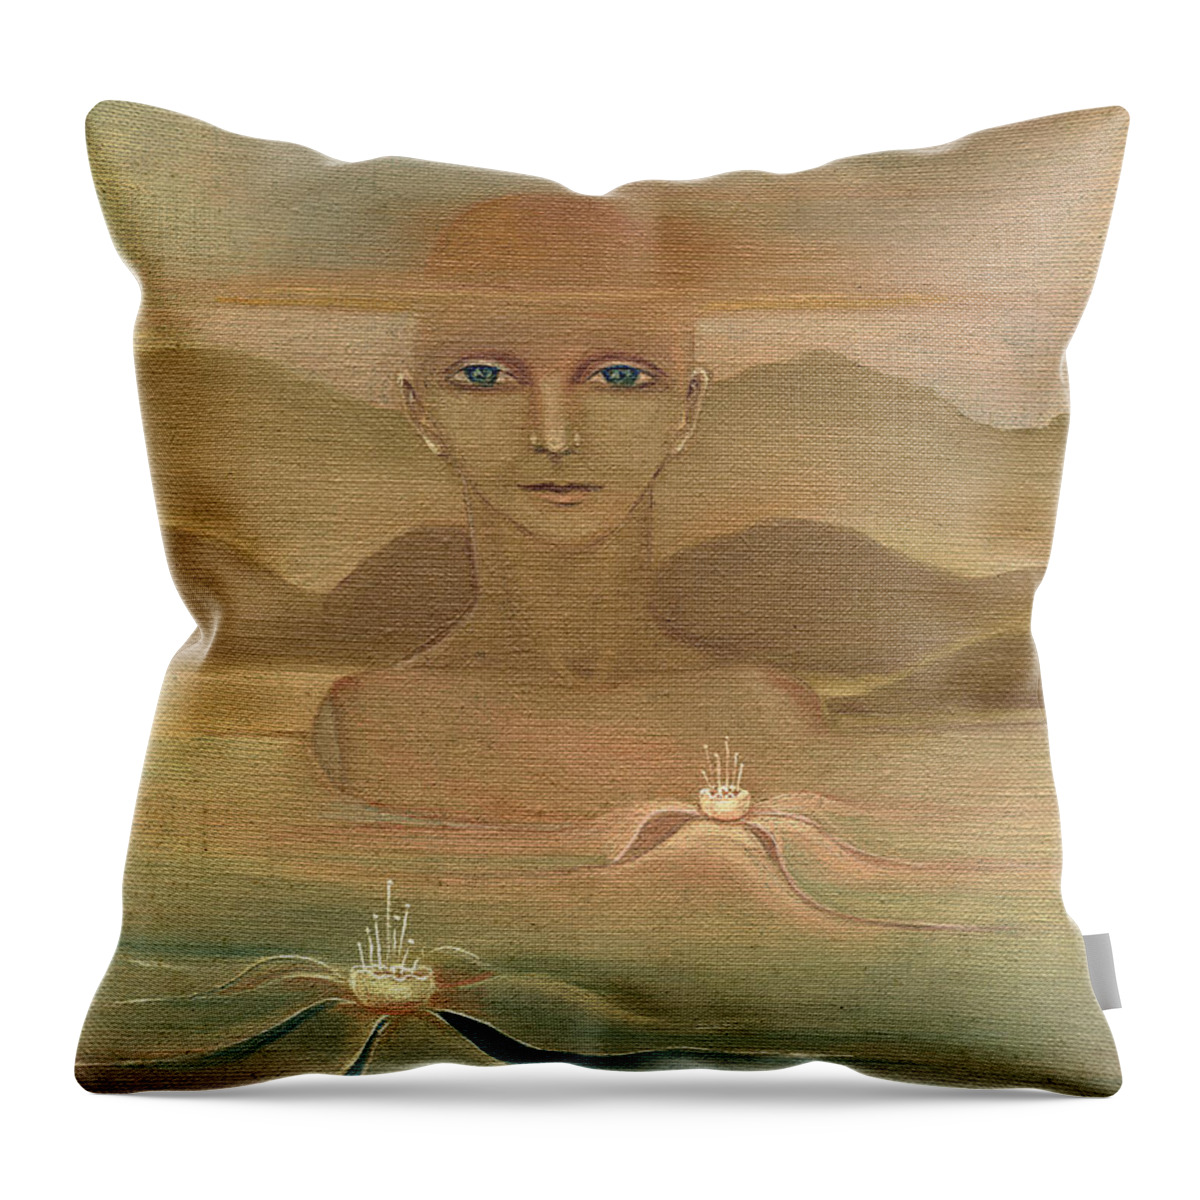 Face Throw Pillow featuring the painting Face from nature desert landscape abstract fantasy with flowers blue eyes yellow cloud in sky by Rachel Hershkovitz